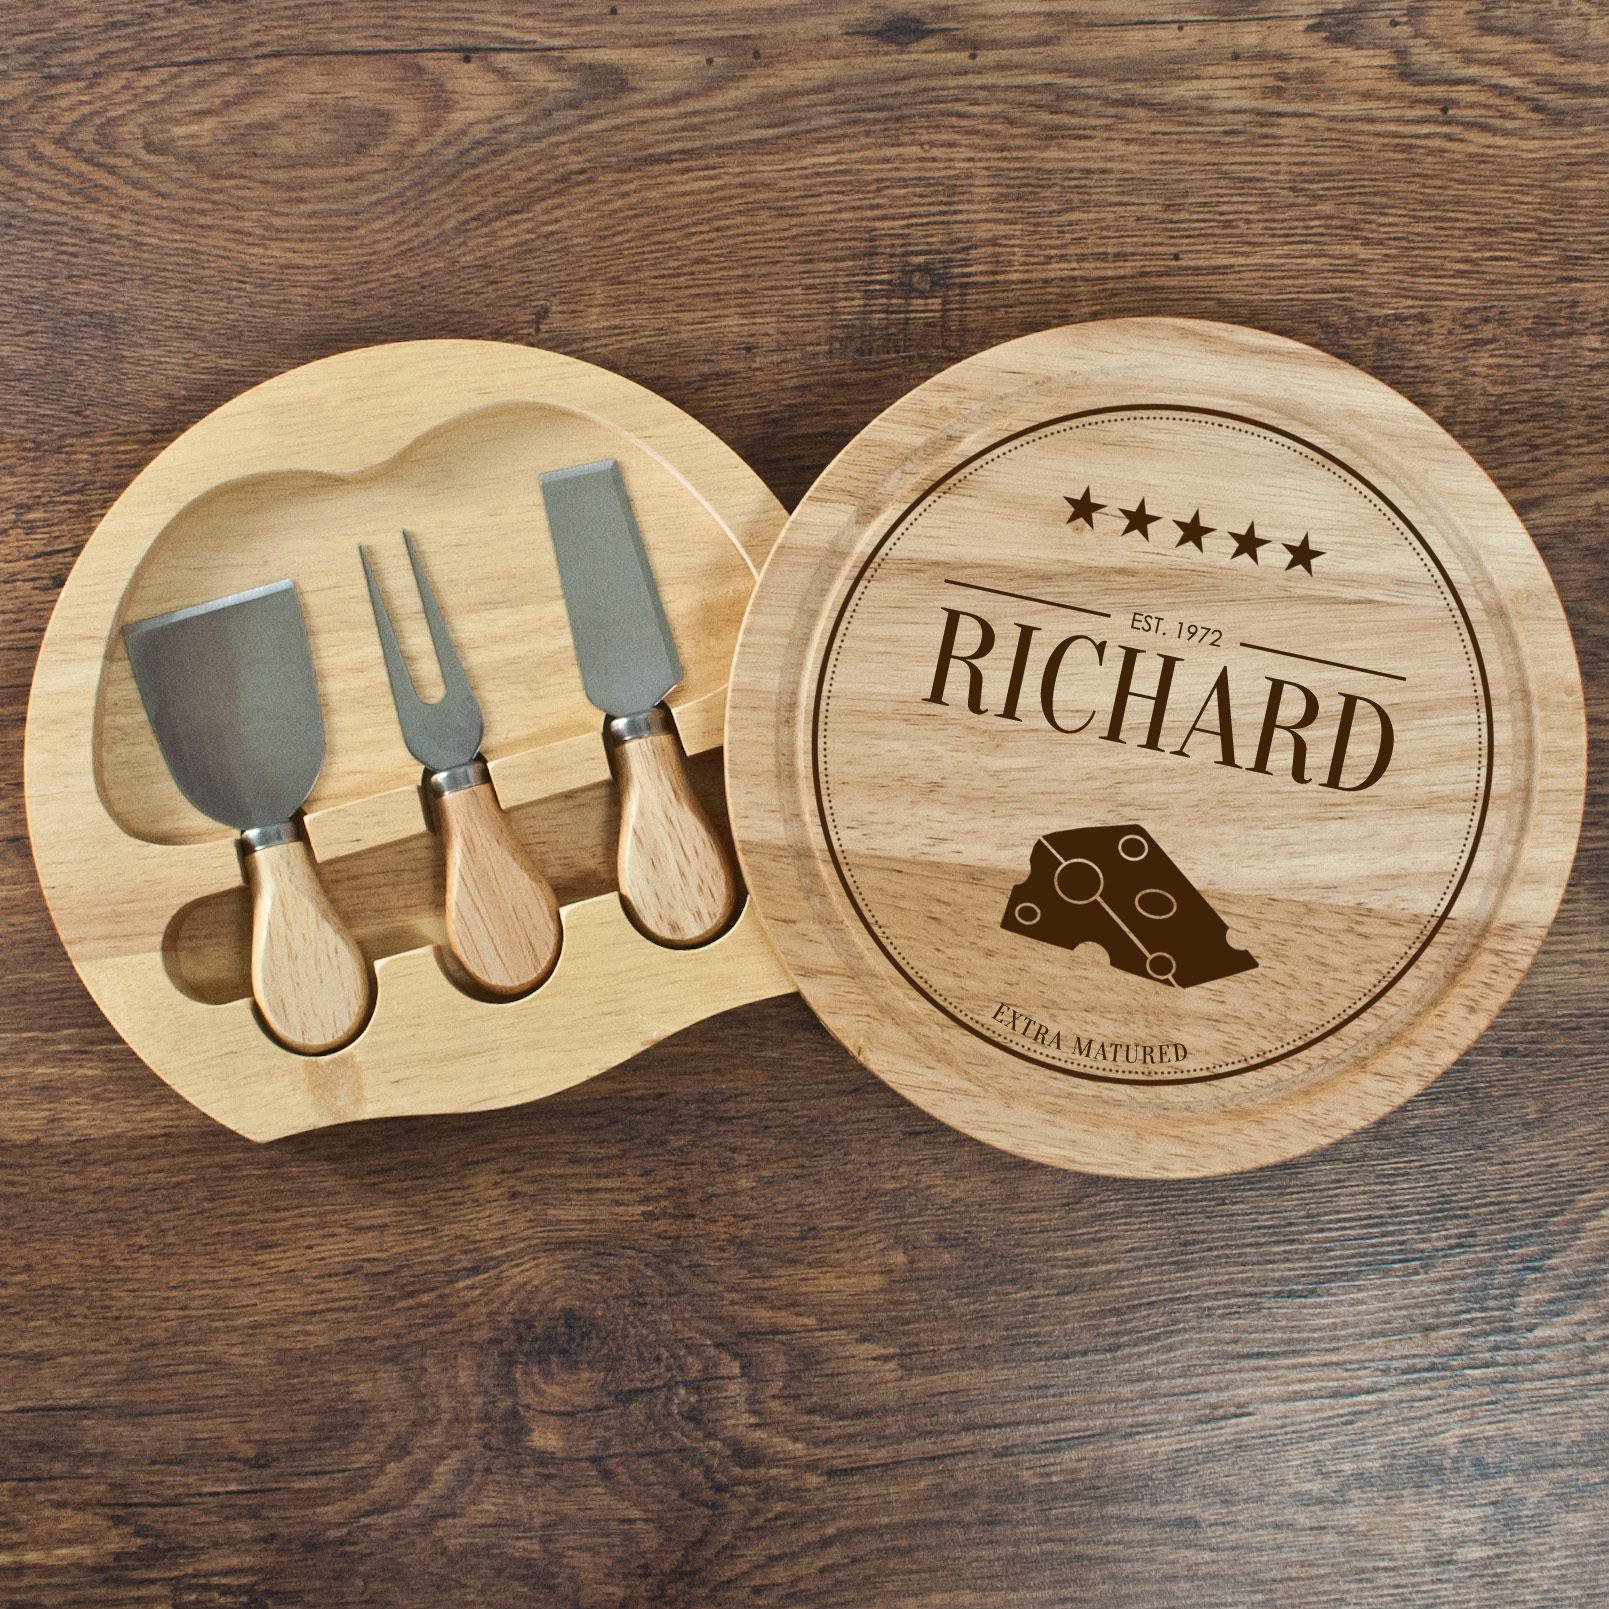 Personalised Extra Mature Cheese Board Set